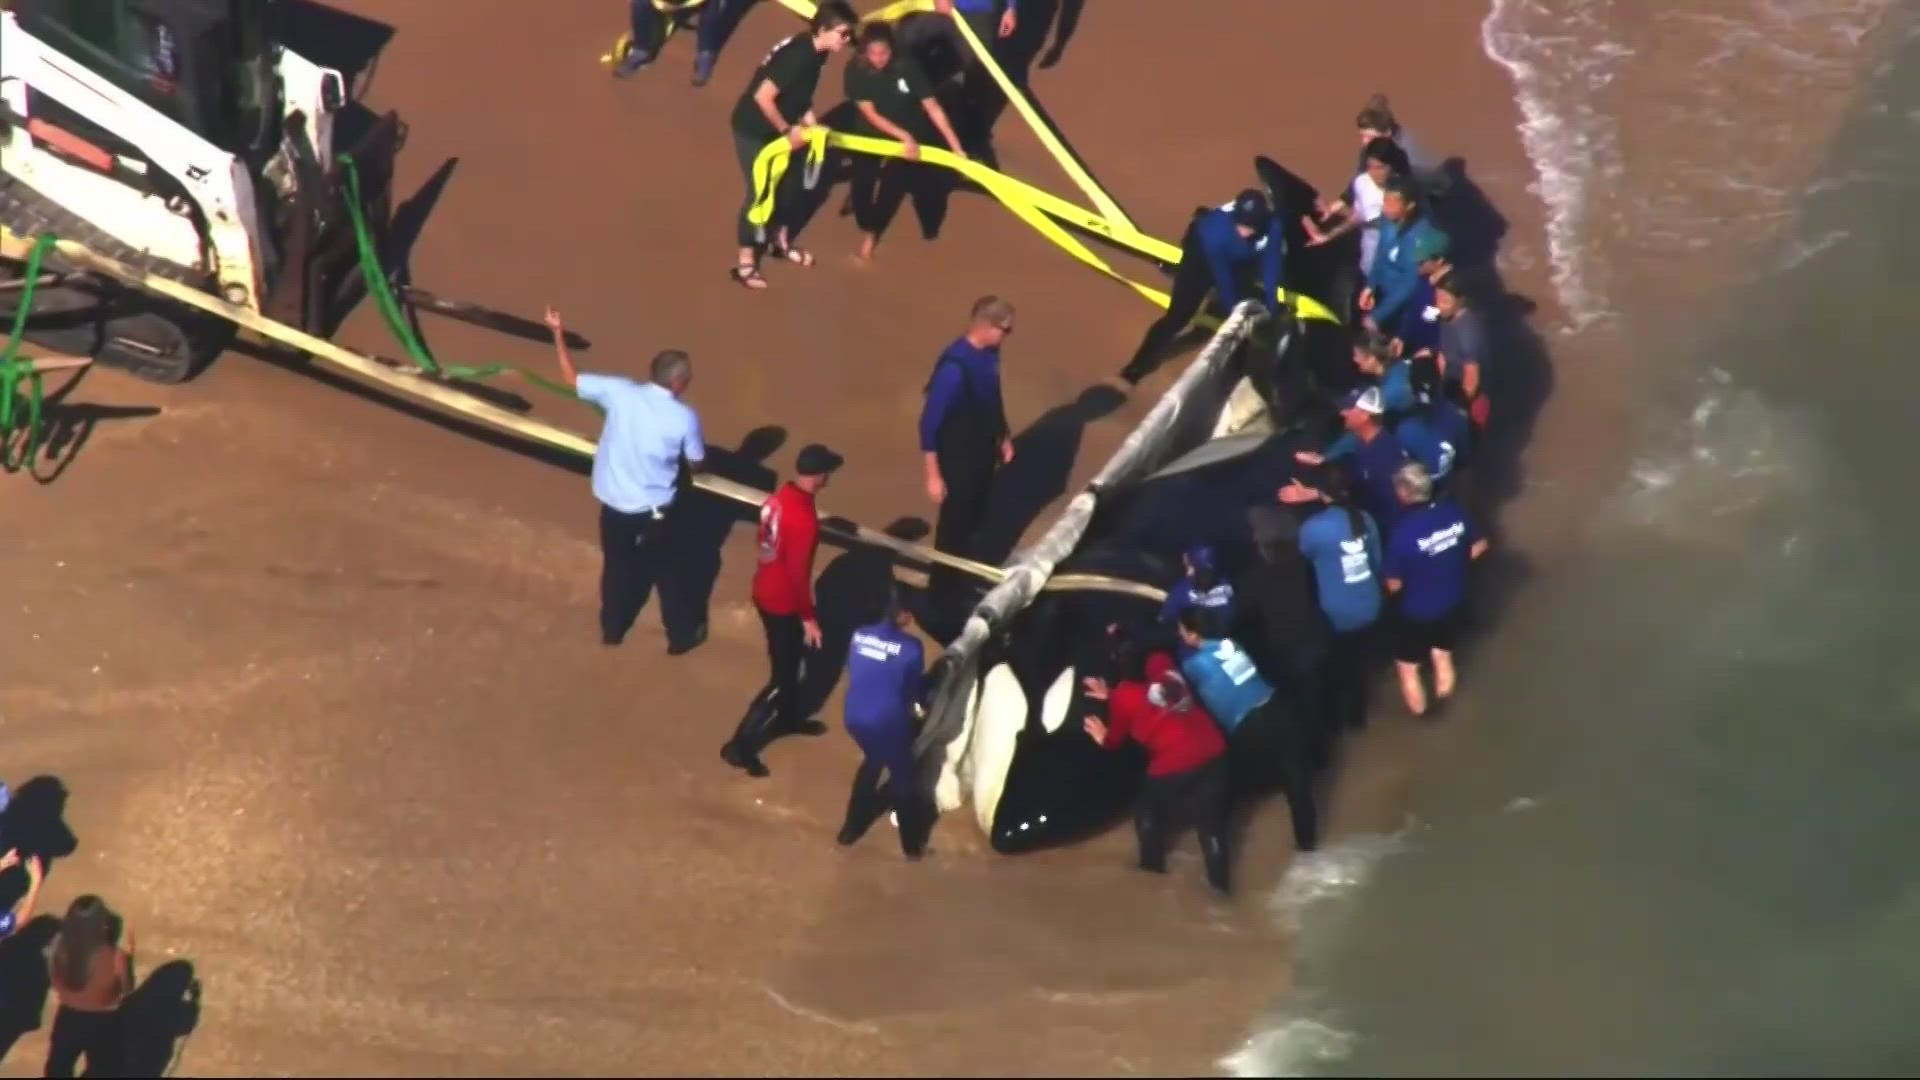 Some of the whales have washed up after a boat strike, but that's not the case for all of them.